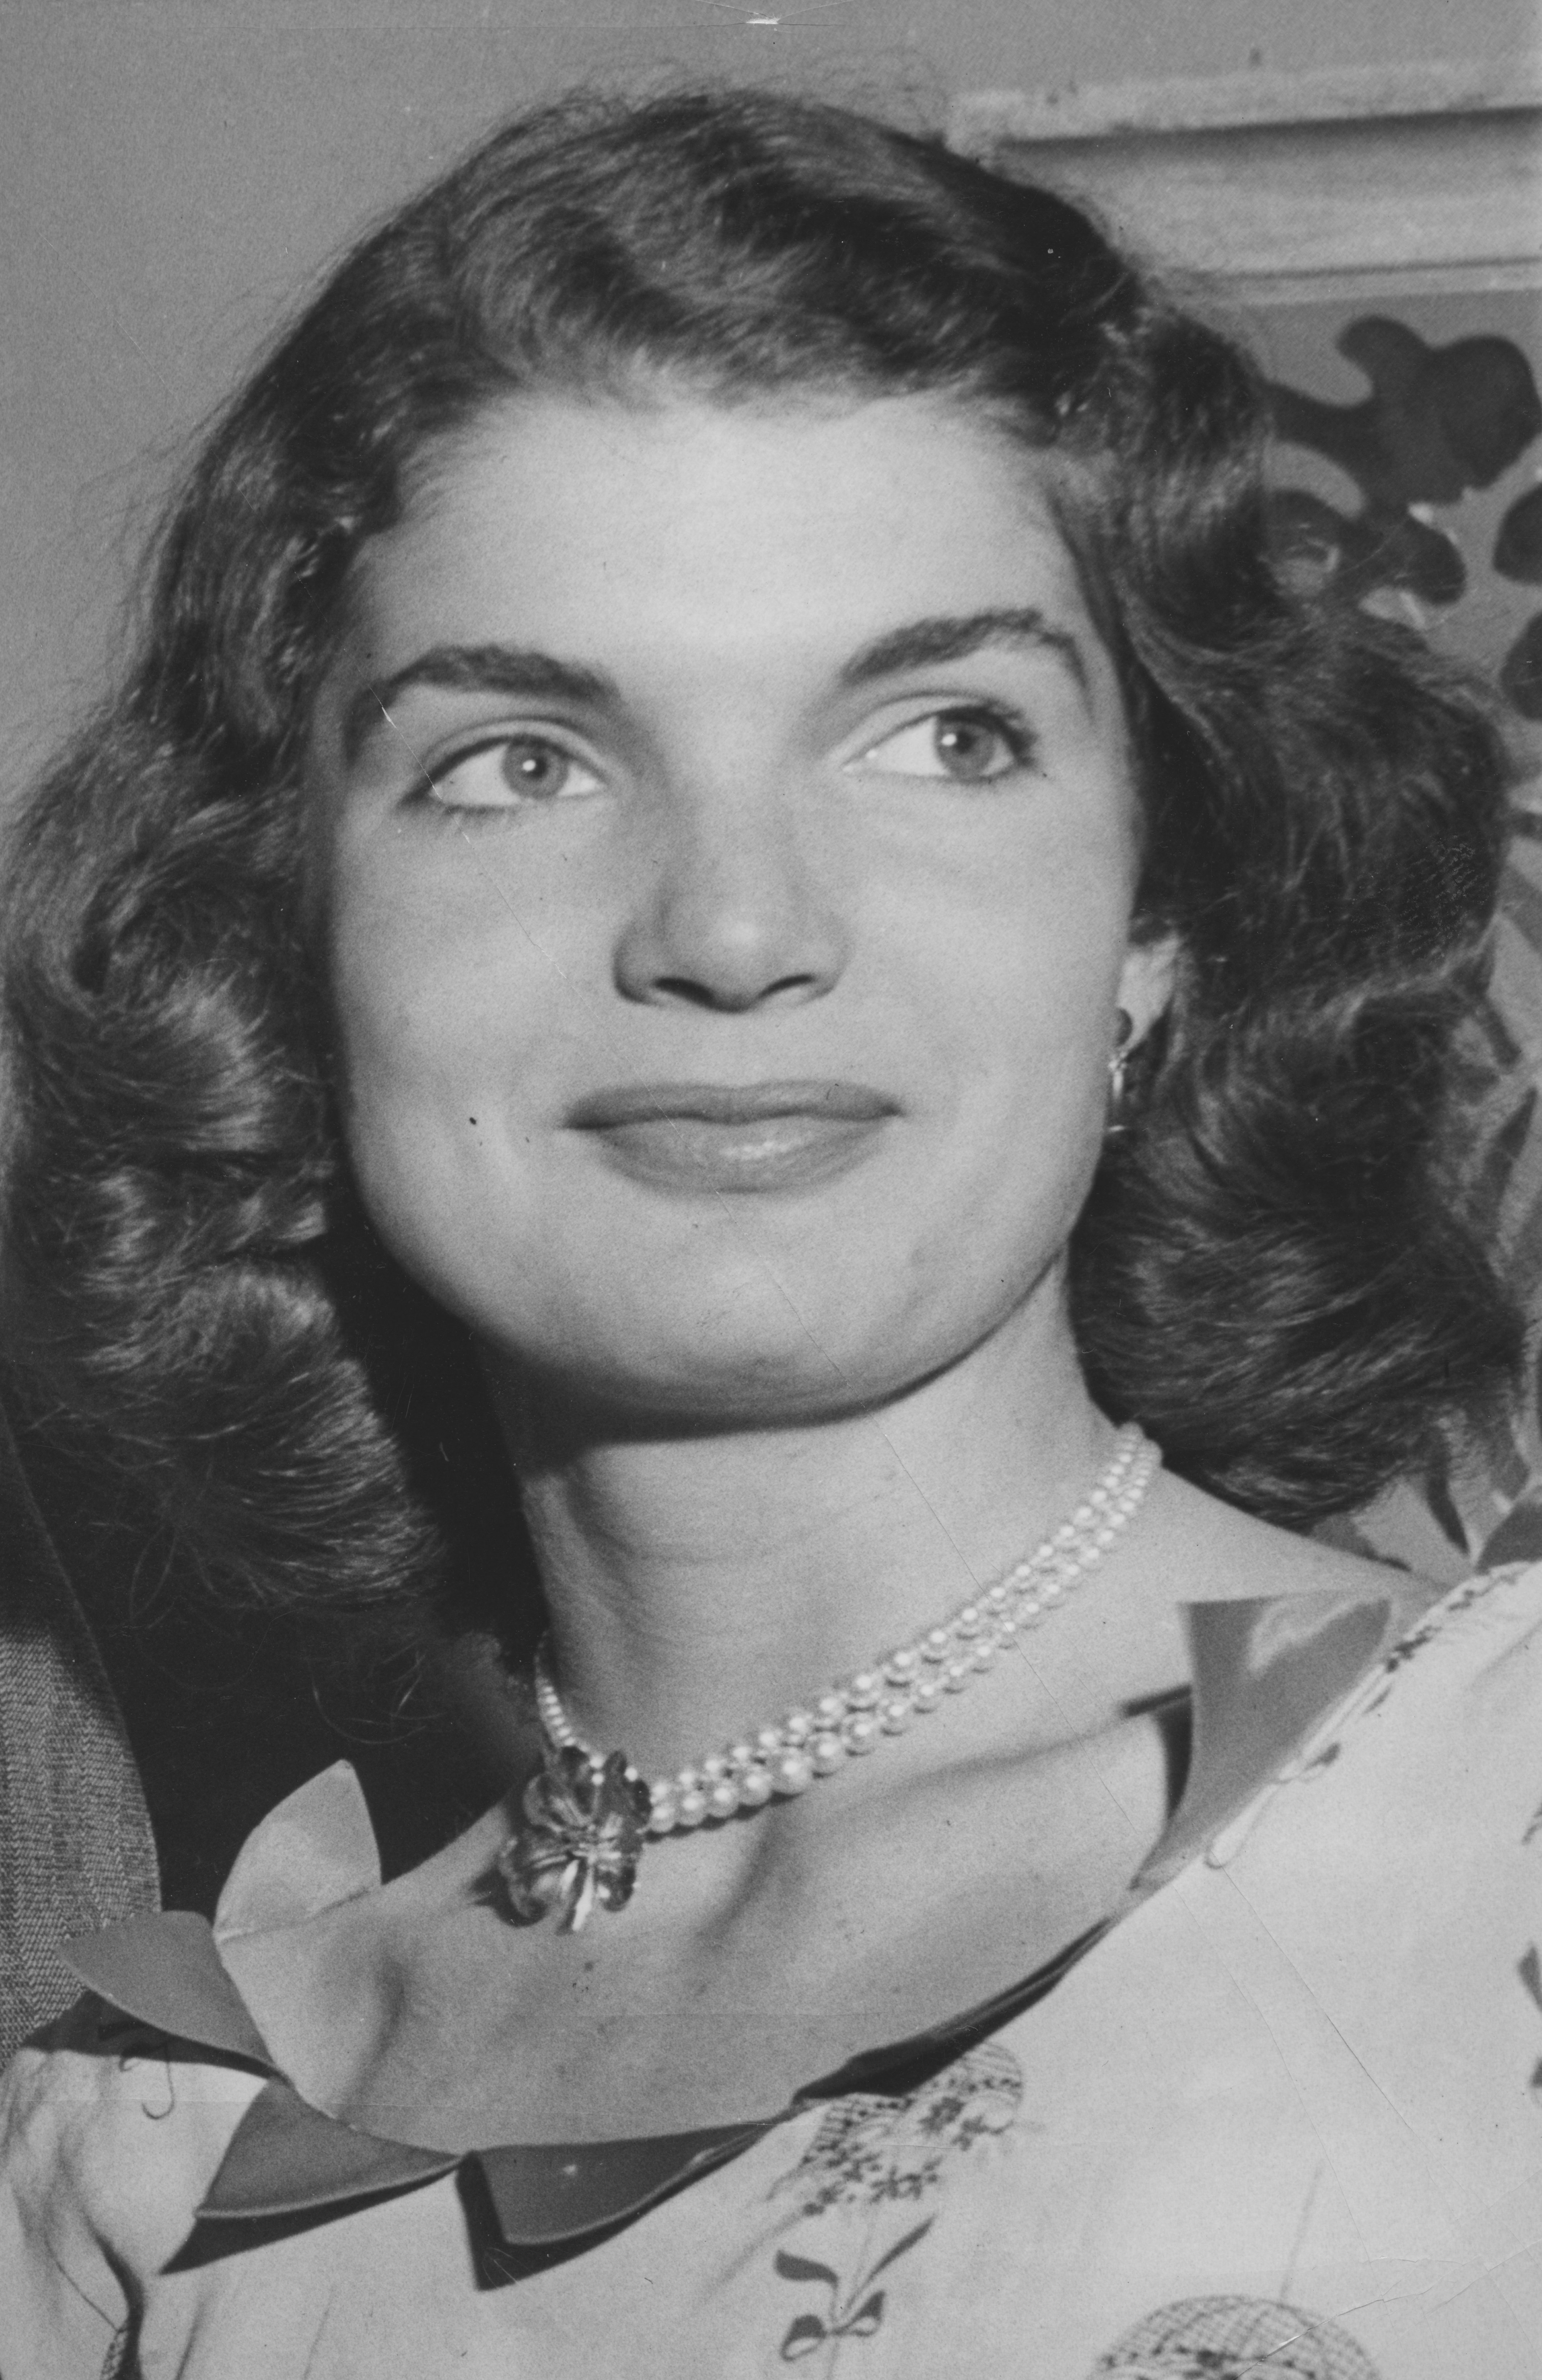 Jacqueline Lee Bouvier shortly before her marriage to Senator John F. Kennedy in 1953. | Source: FPG/Archive Photos/Getty Images